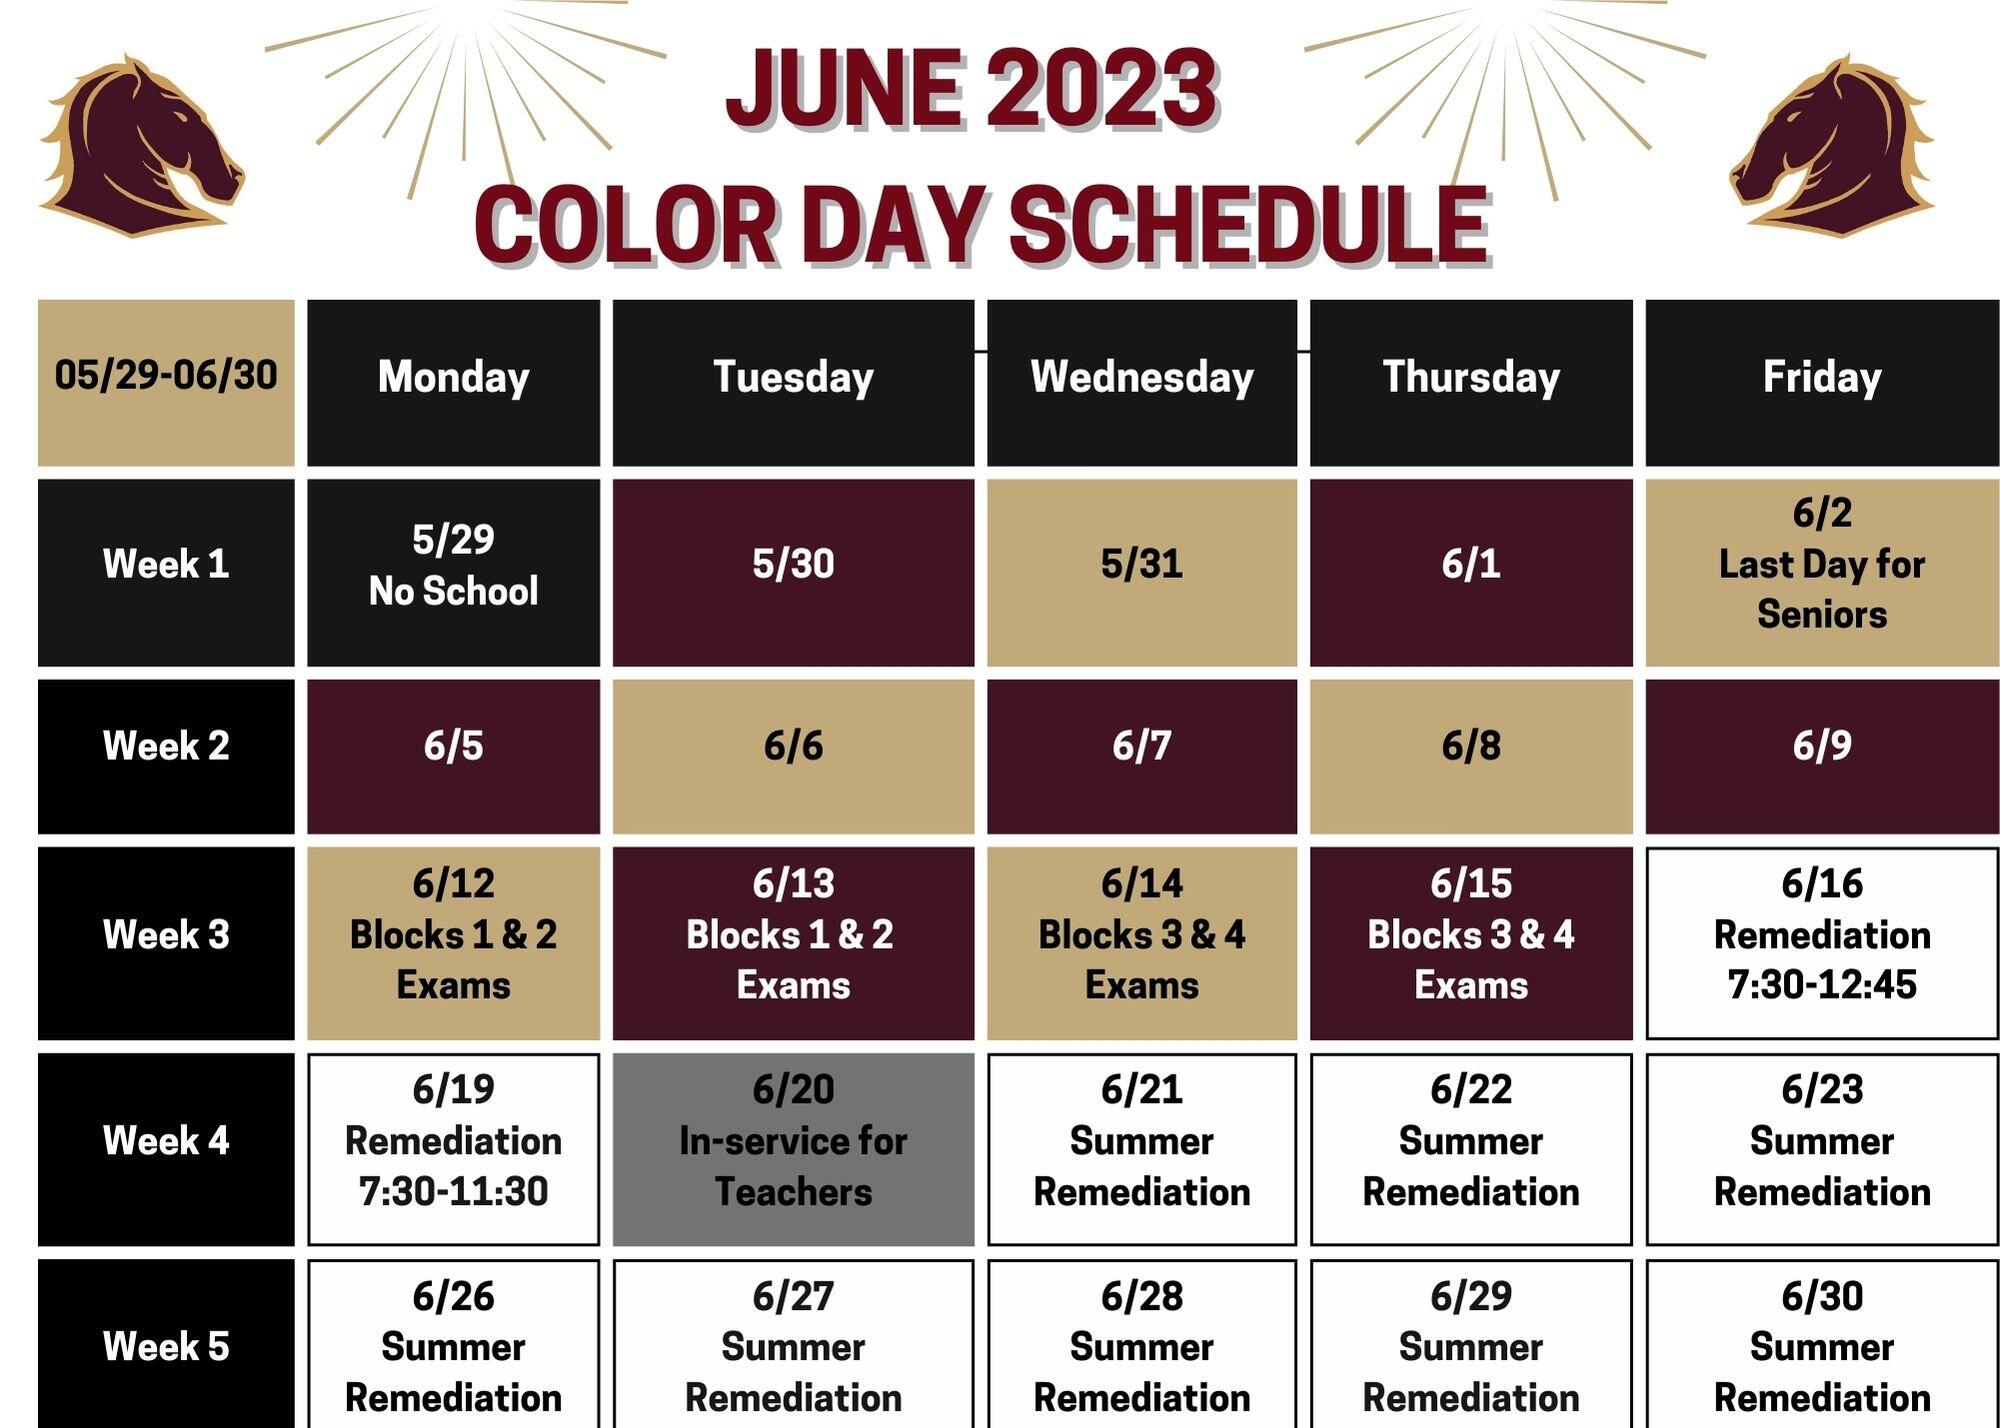 June 2023 Color Day Calendar, Alternating maroon and gold days with 10/3 being maroon and alternating from that date. No school 10/10 so the alternating colors skip that day and continue on.